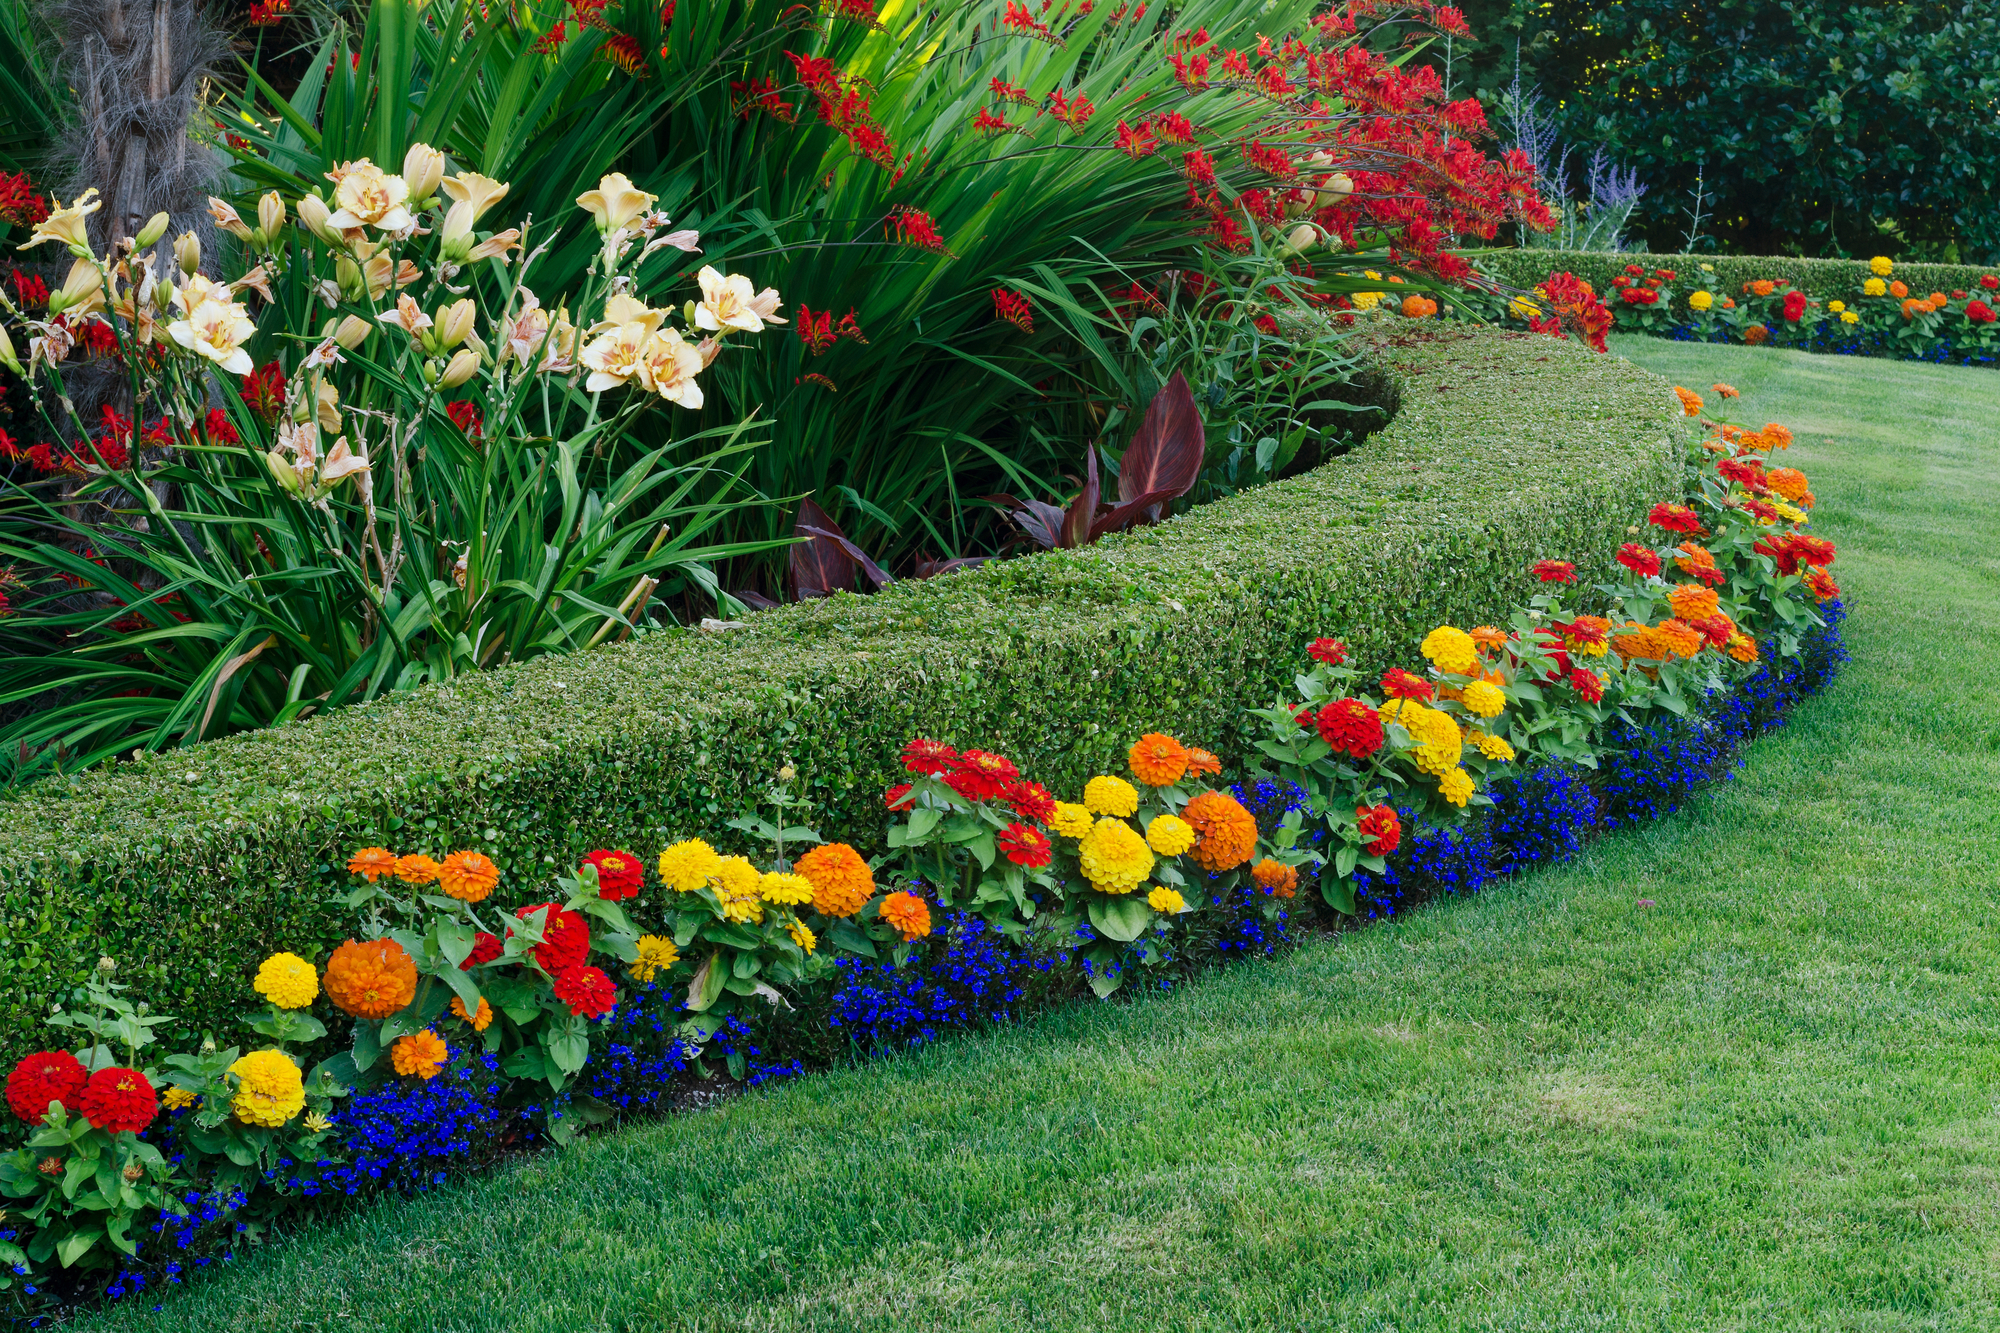 Landscaping For Apartments, Lawn Maintenance For Apartments